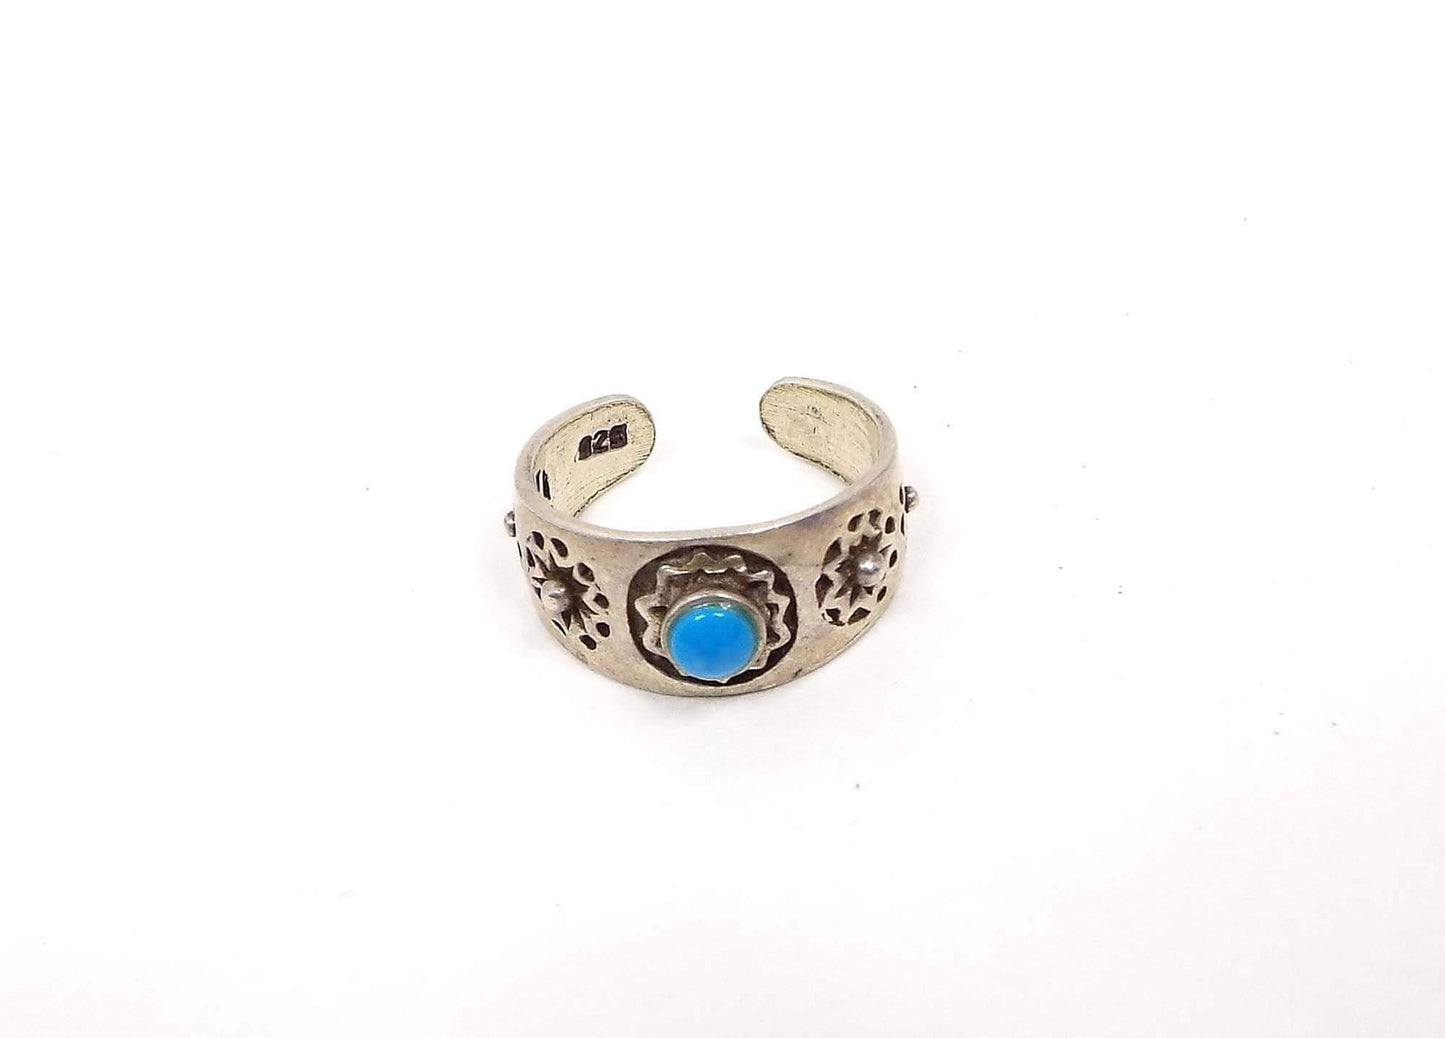 Vintage Sterling Silver and Faux Turquoise Toe Ring